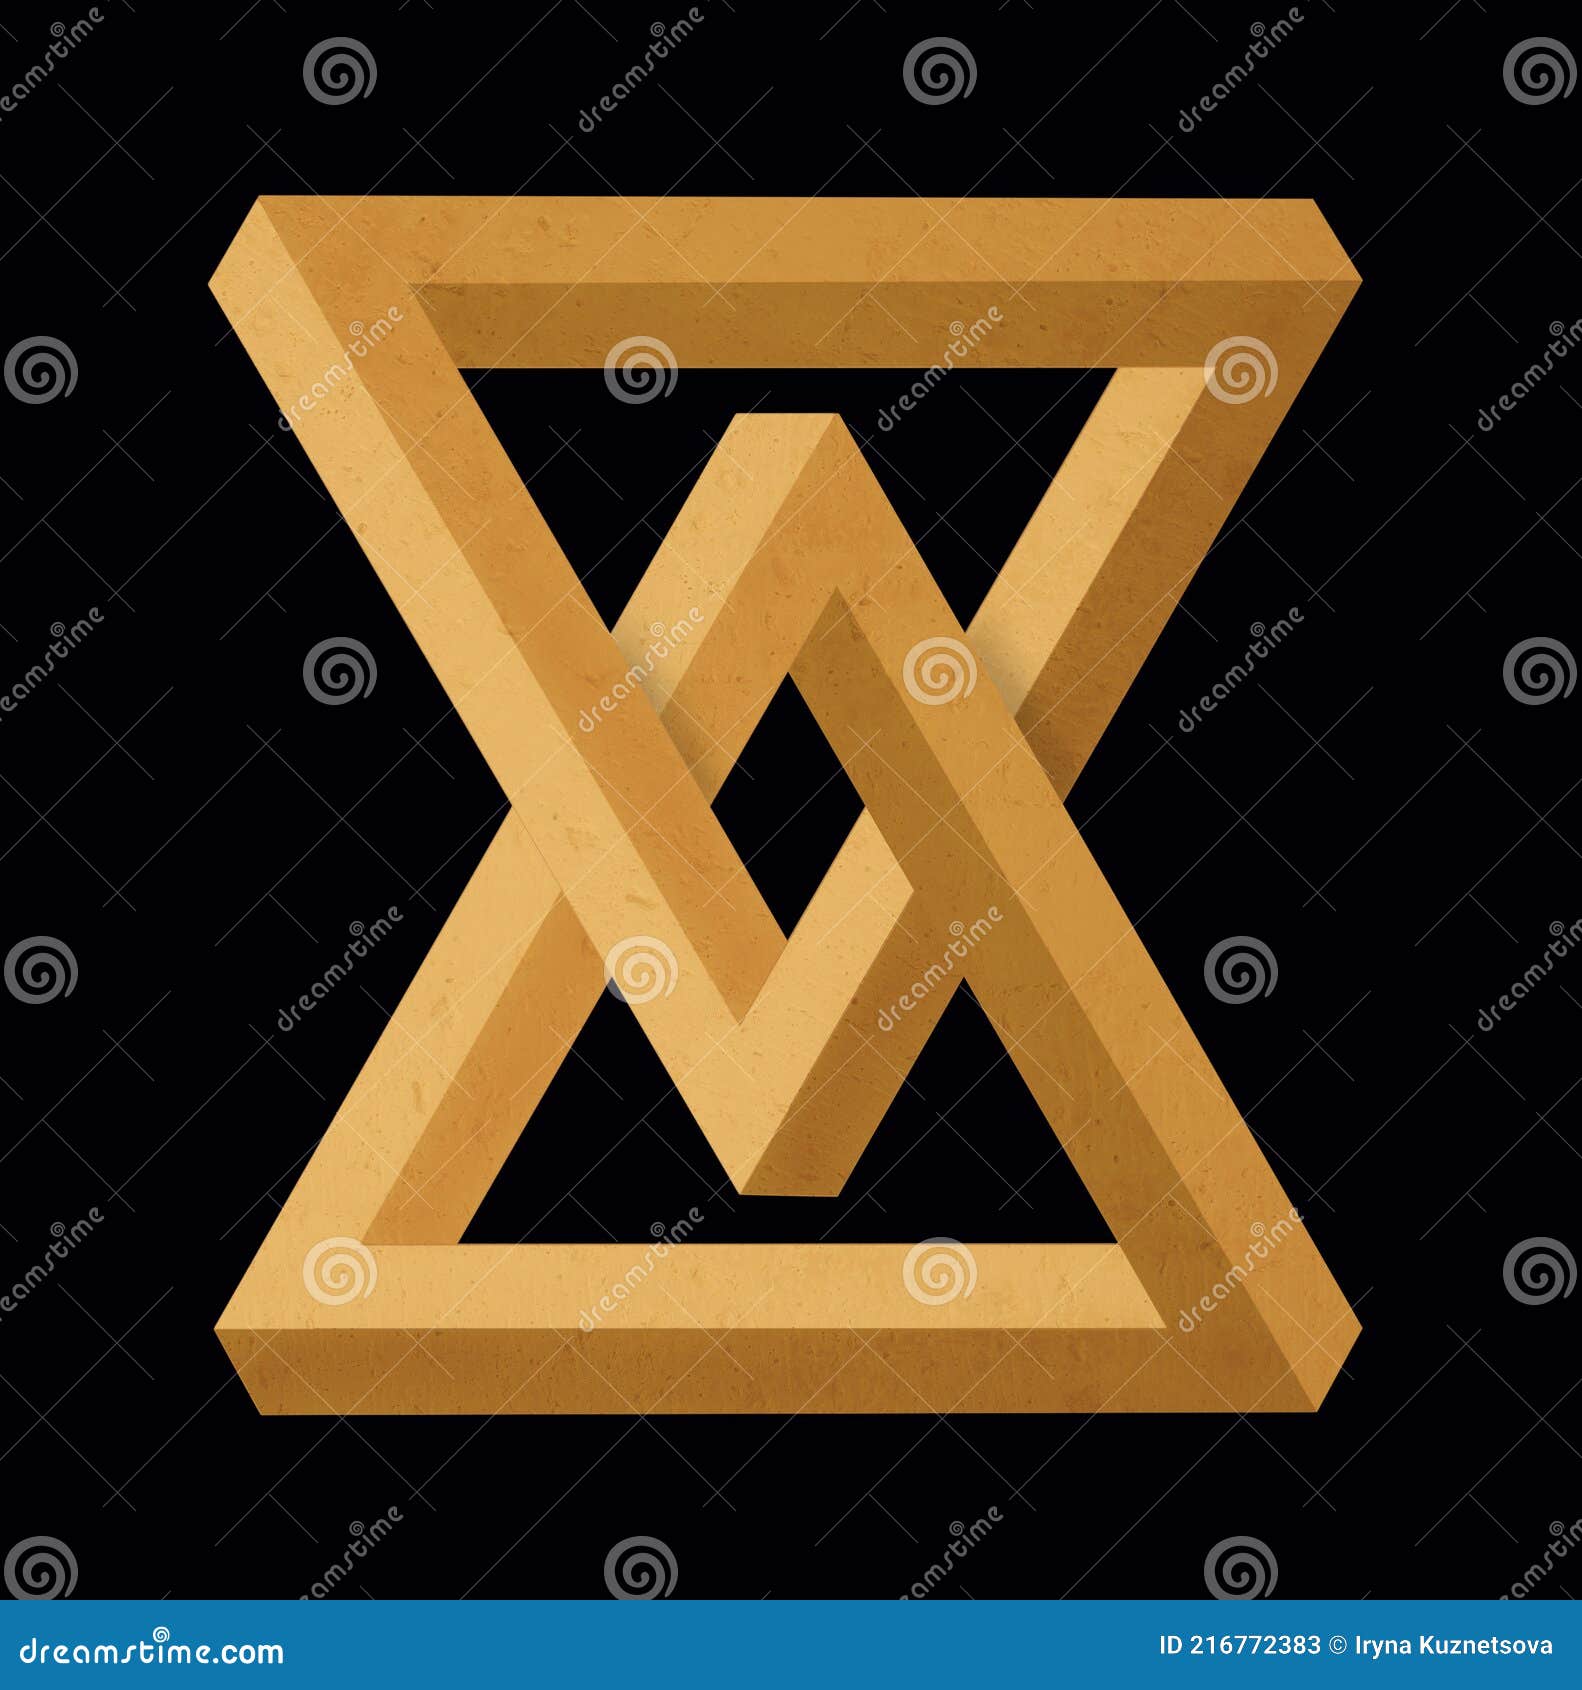 Triangles Impossible on Black Background Stock Illustration ...